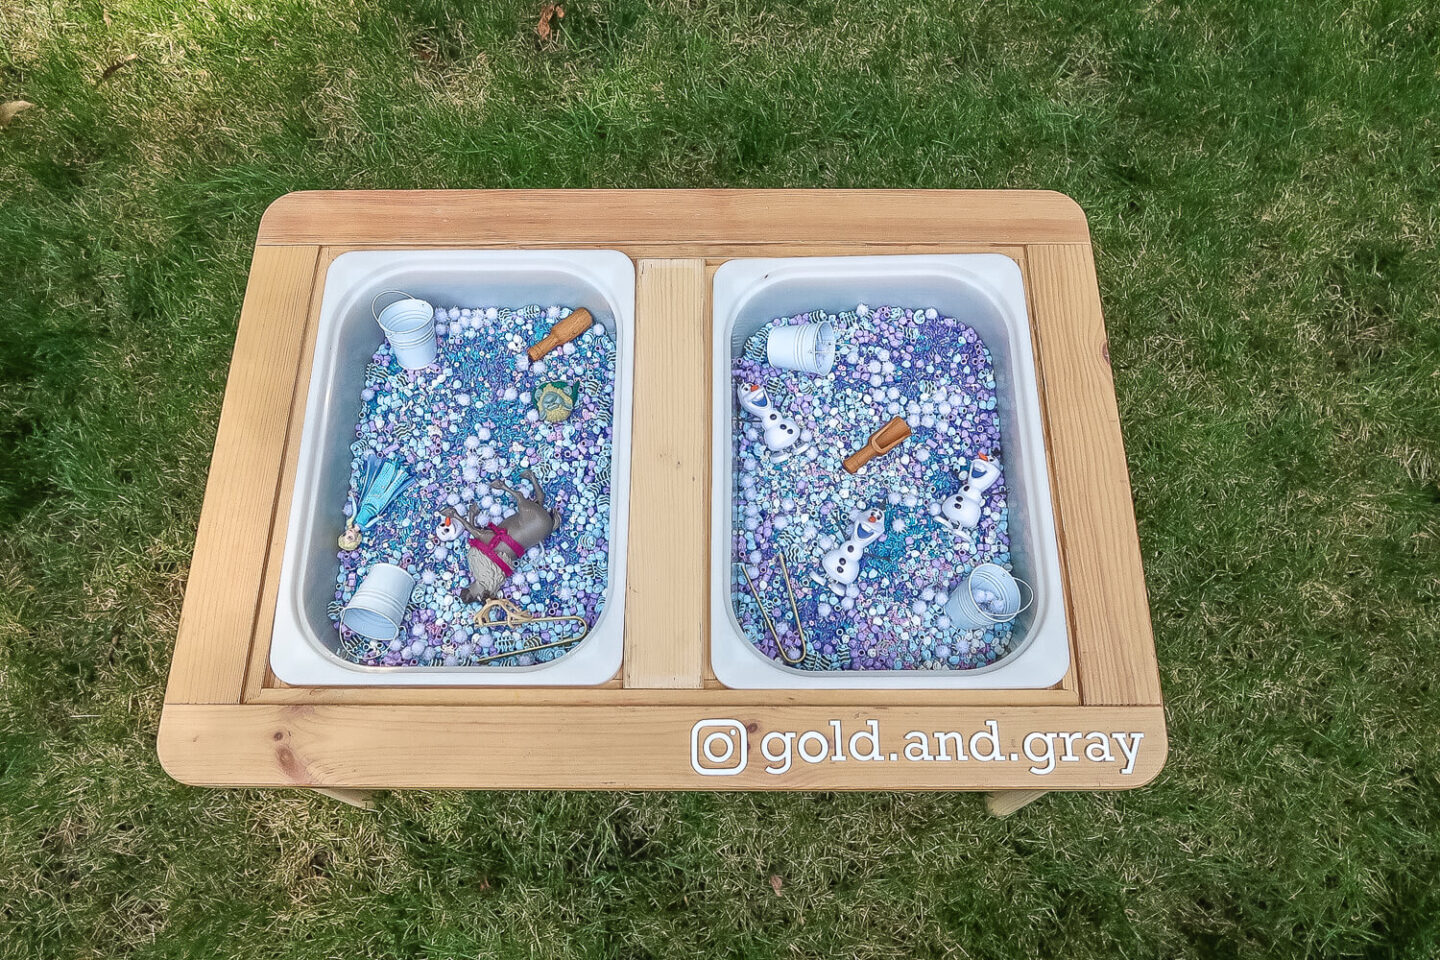 frozen themed sensory table with @gold.and.gray